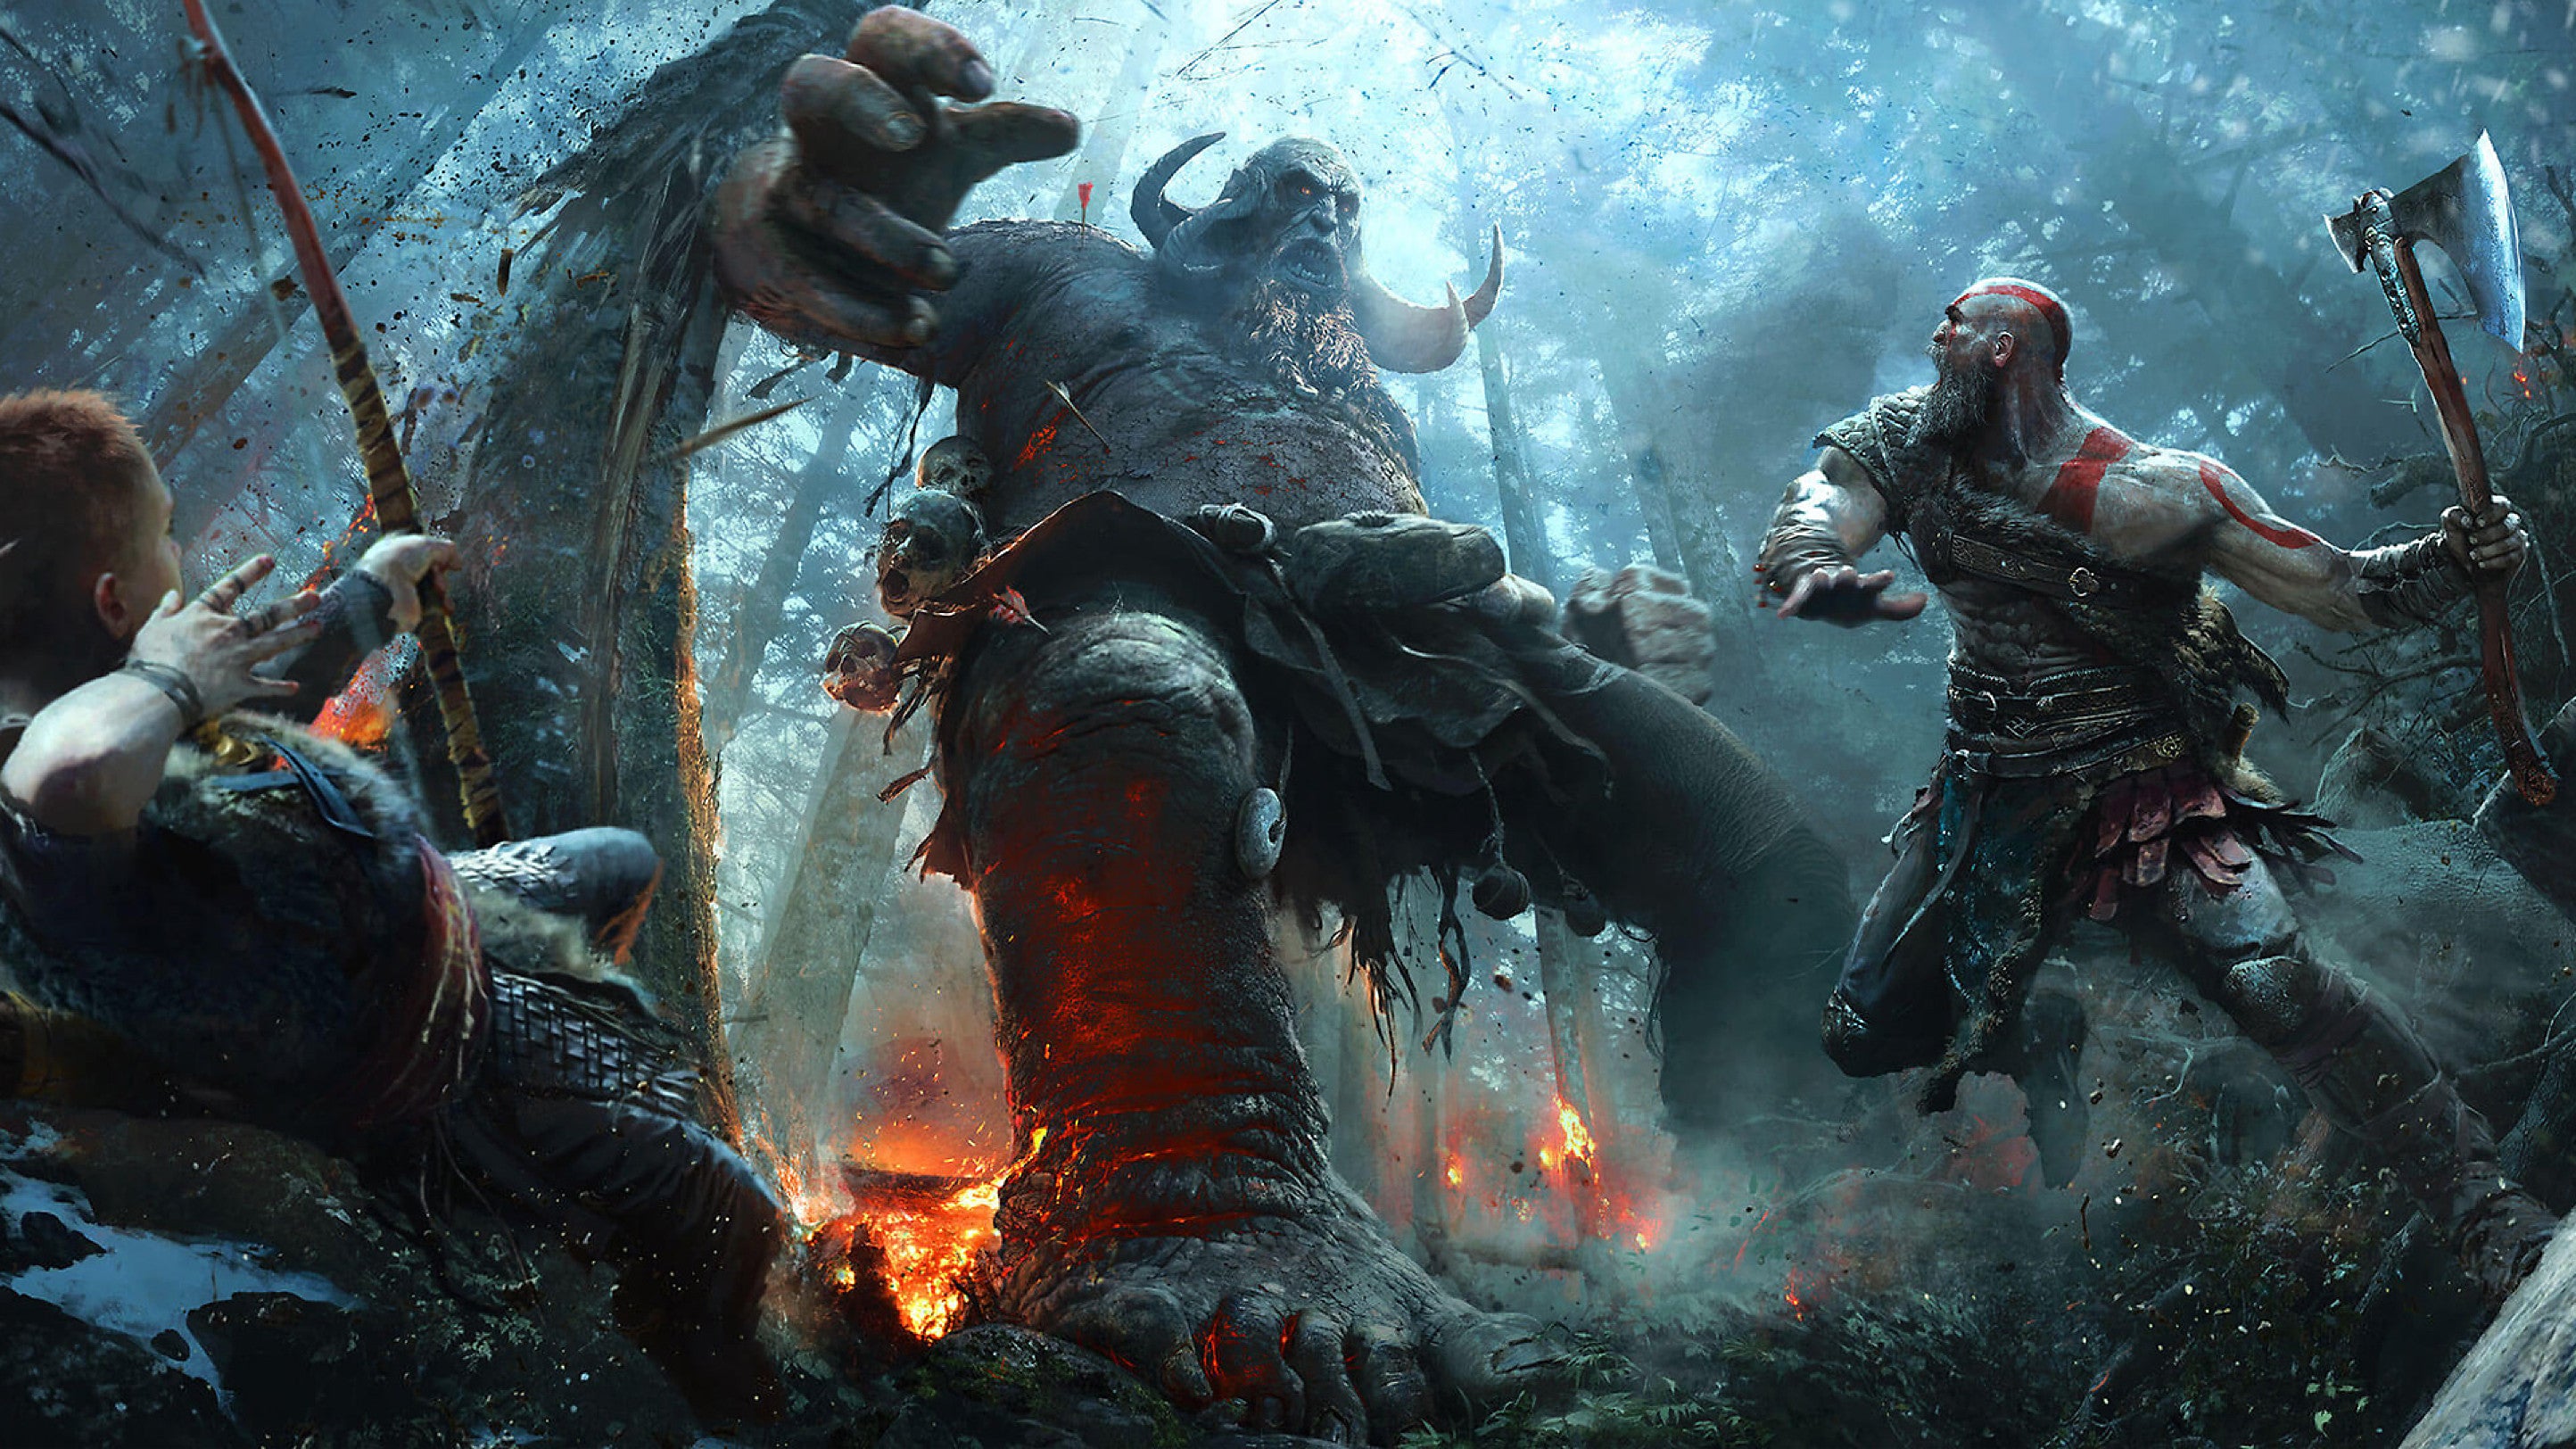 Image for "An Unending Series of Compromises:" God of War Director Cory Barlog on Building a New Myth From Old Parts